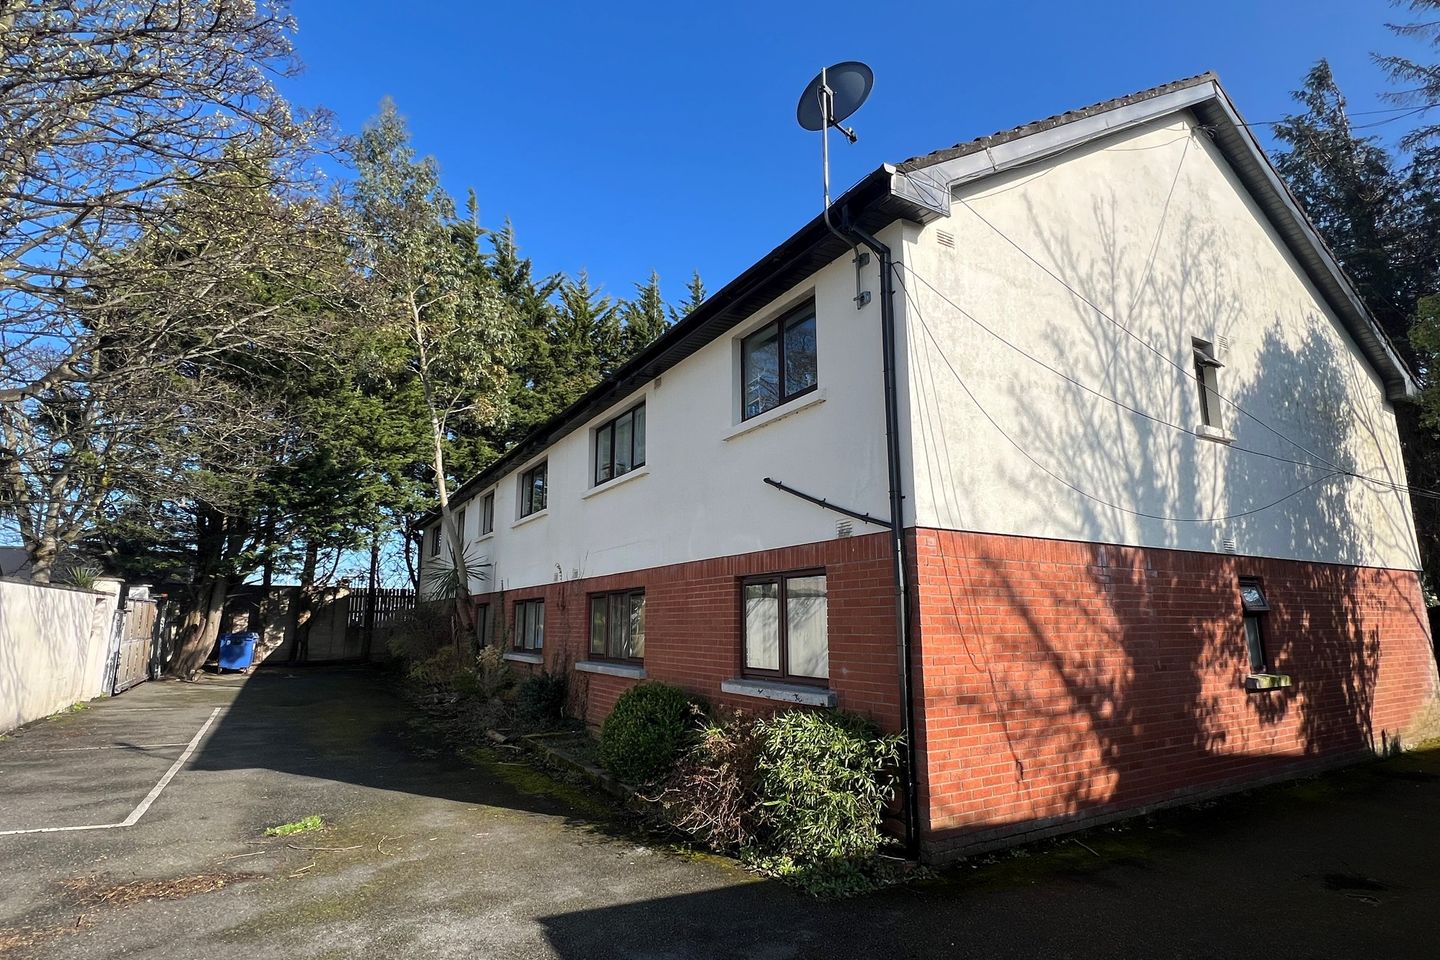 Apartment 3, Ardbrae Court, Bray, Co. Wicklow, A98EE92